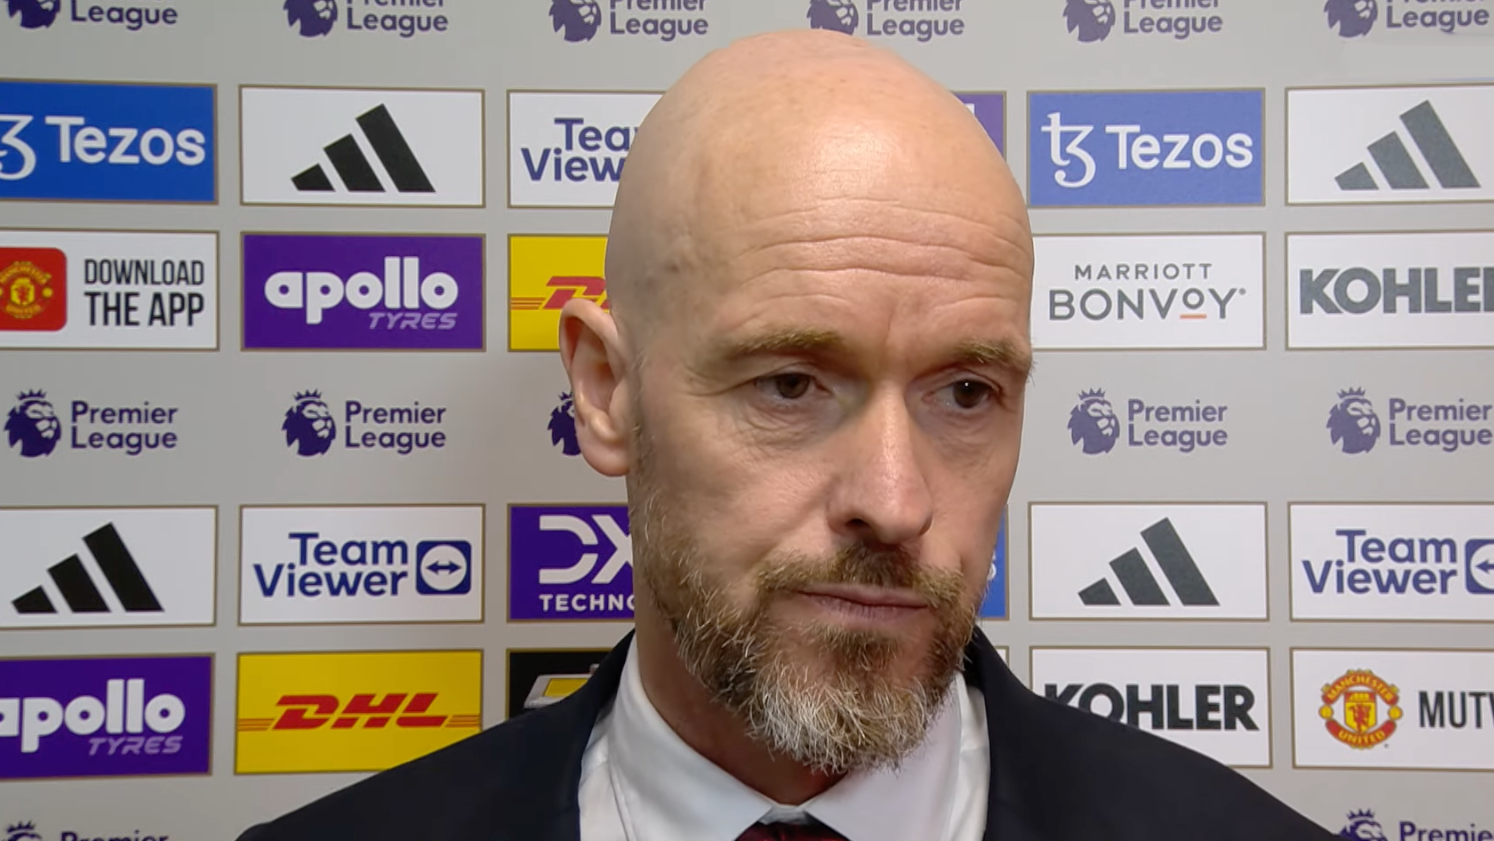 Erik ten Hag calls Manchester United 'one of the most dynamic and entertaining teams' in the Premier League